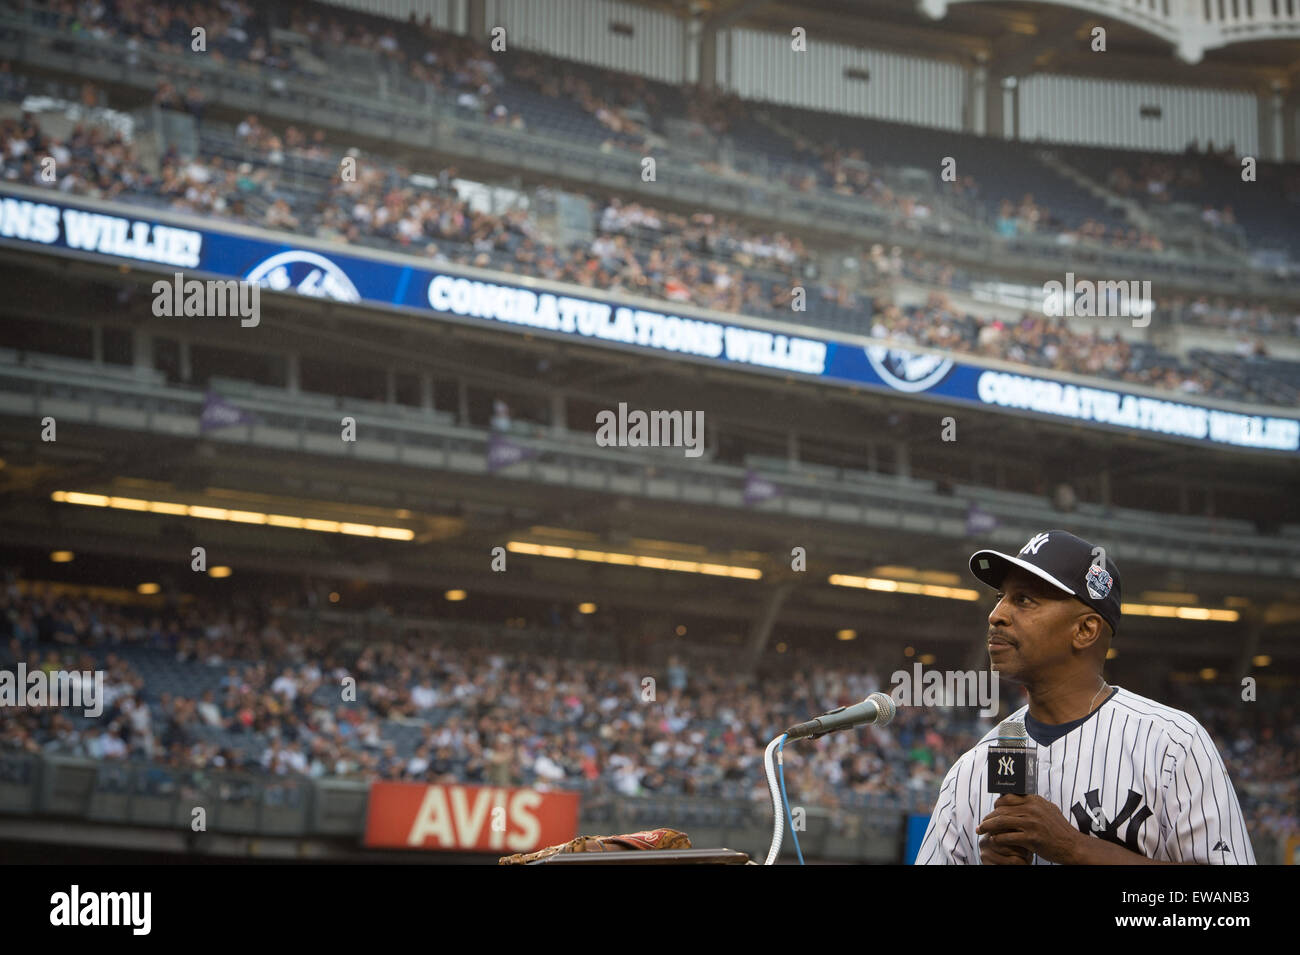 Bronx, NY, USA. 20th June, 2015. WILLIE RANDOLPH is honored with a Monument Park plaque as part of 2015 Old-Timers' Day, Yankee Stadium, Saturday June 20, 2015. Credit:  Bryan Smith/ZUMA Wire/Alamy Live News Stock Photo